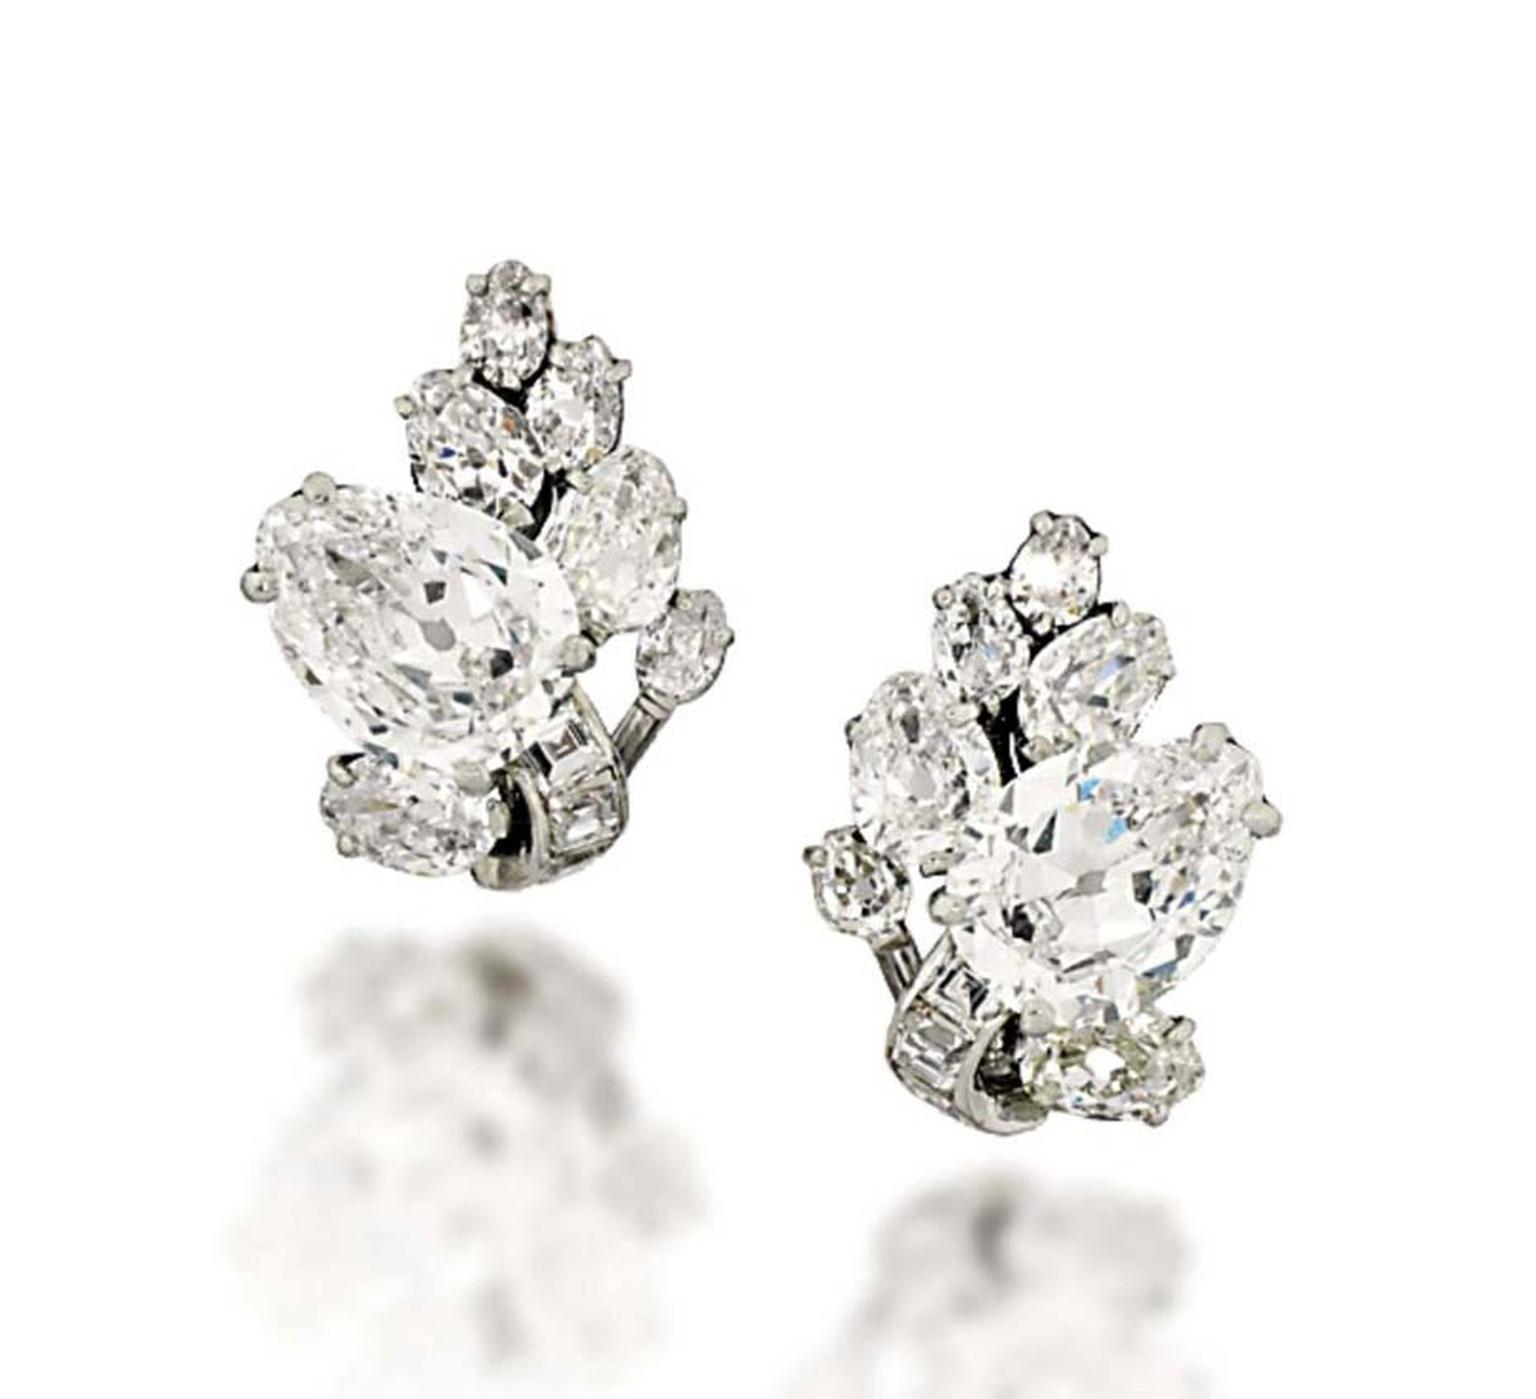 A pair of cluster diamond earrings from Christie’s Important Jewels sale, taking place on 26 November 2014.